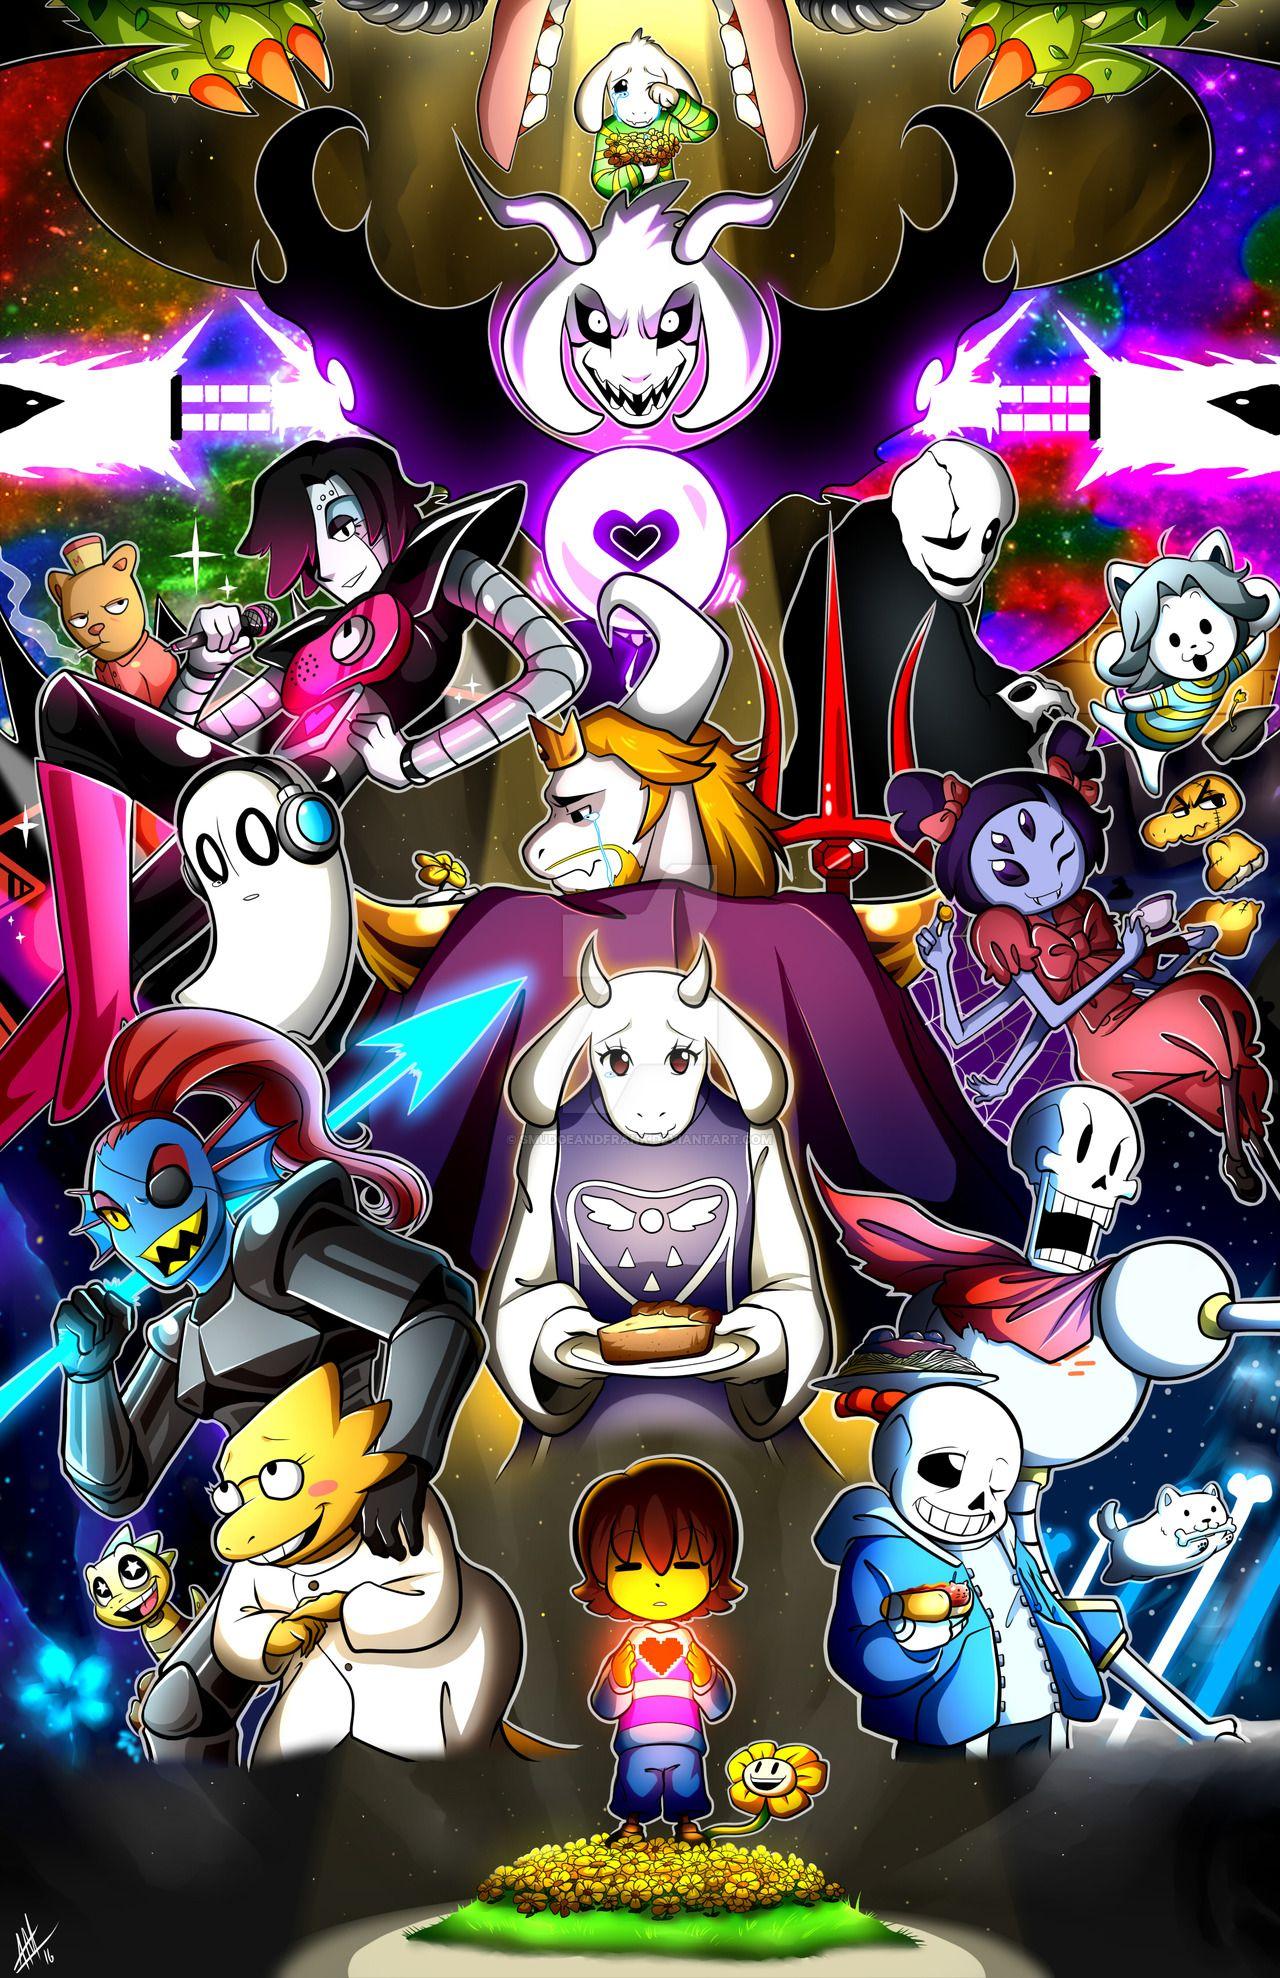 UNDERTALE The Game Image Undertale HD Wallpaper And Background